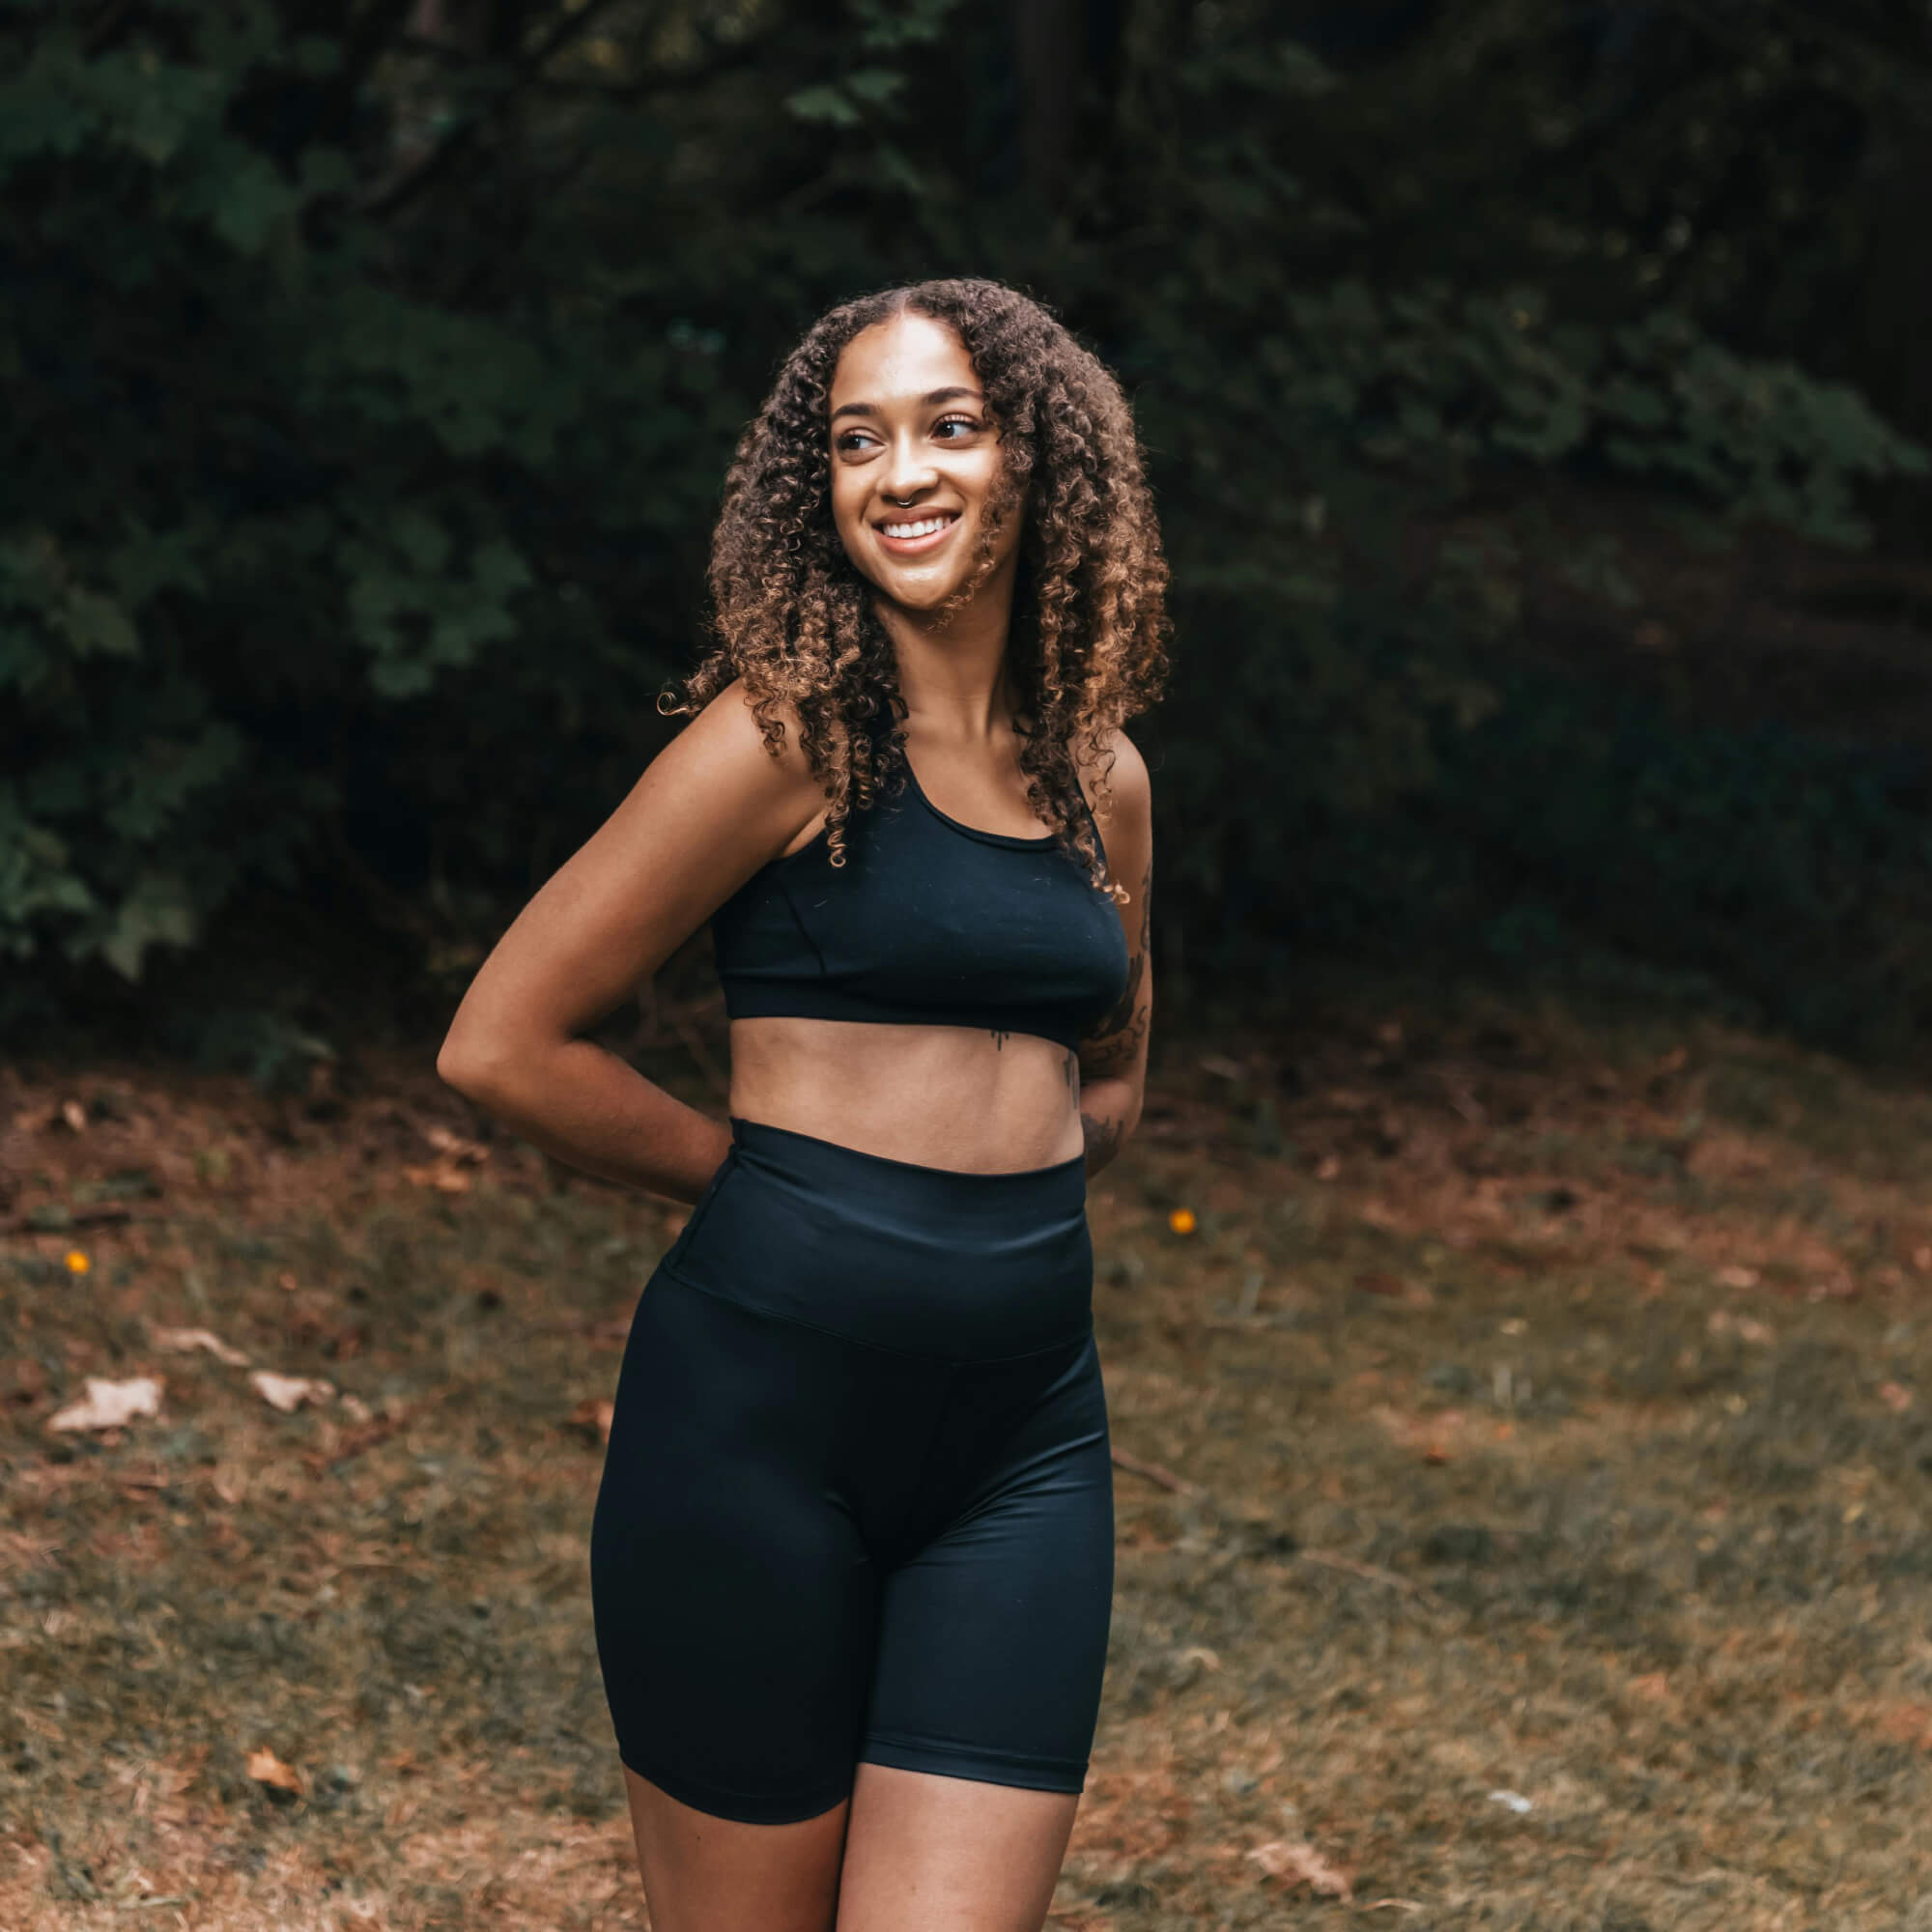 Why Choose Afr-letics for Your Activewear Needs